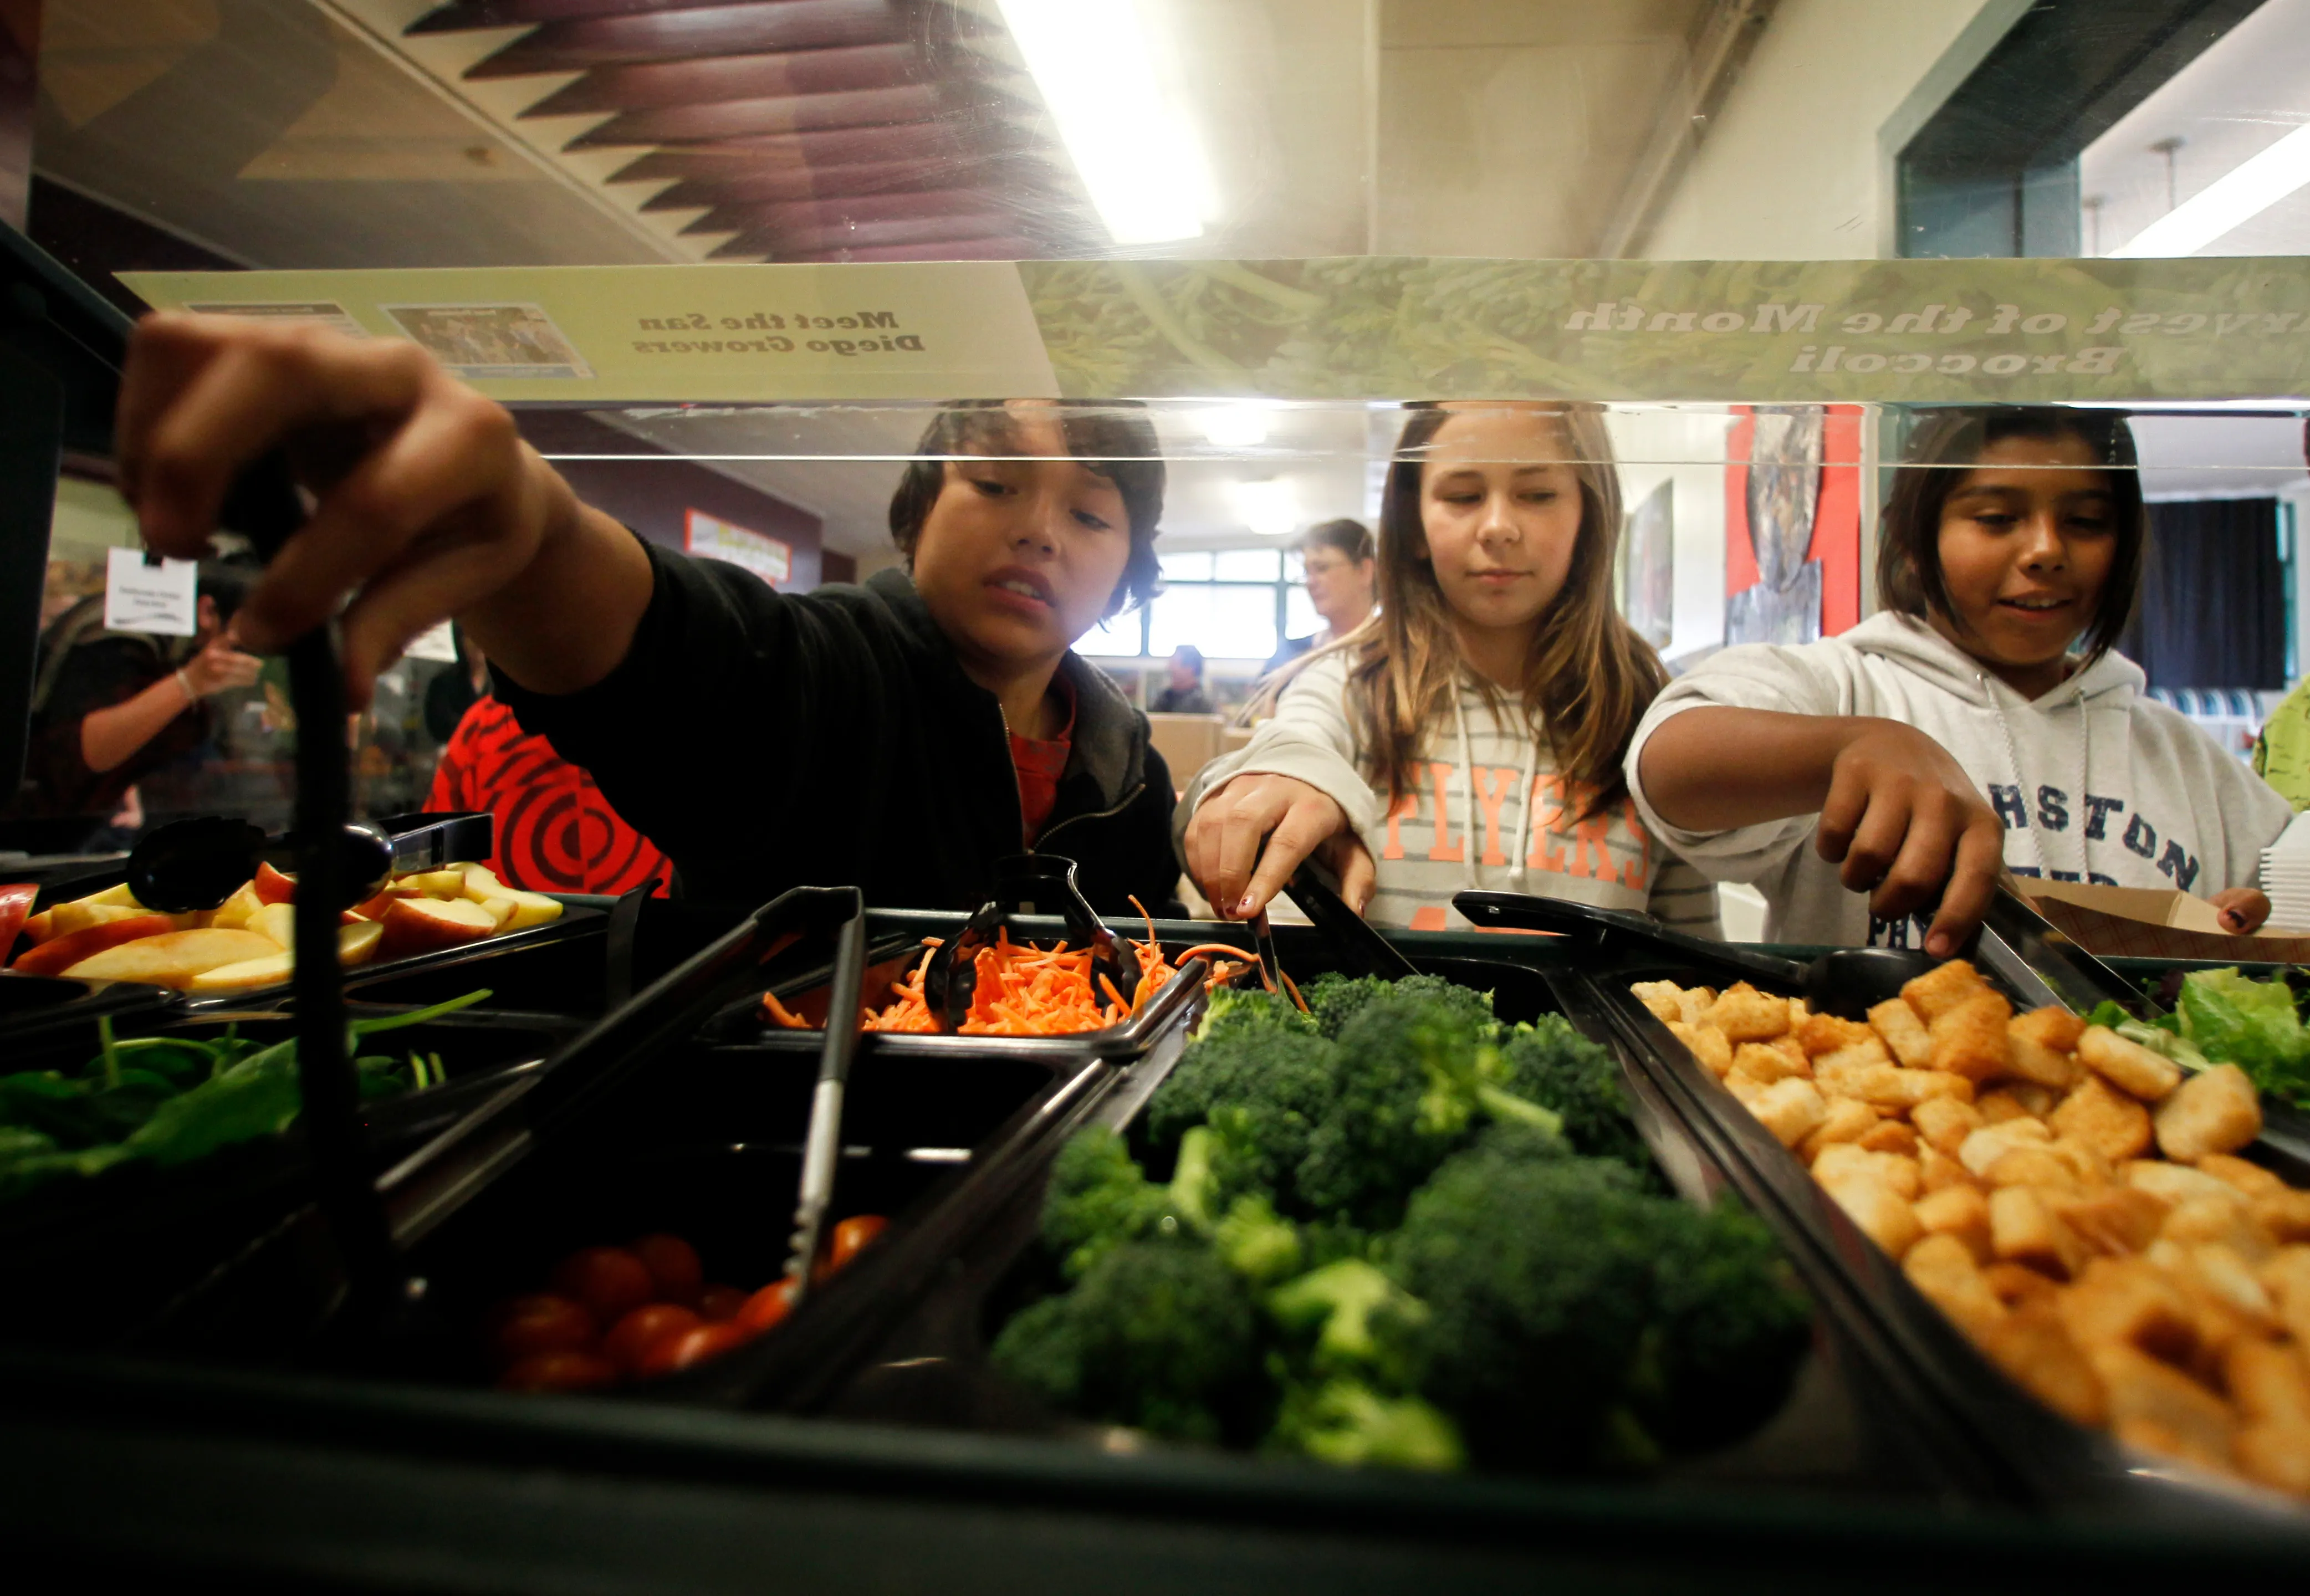 School lunches have become more nutritious despite many challenges, a look  at eight elementary schools shows - Washington Post